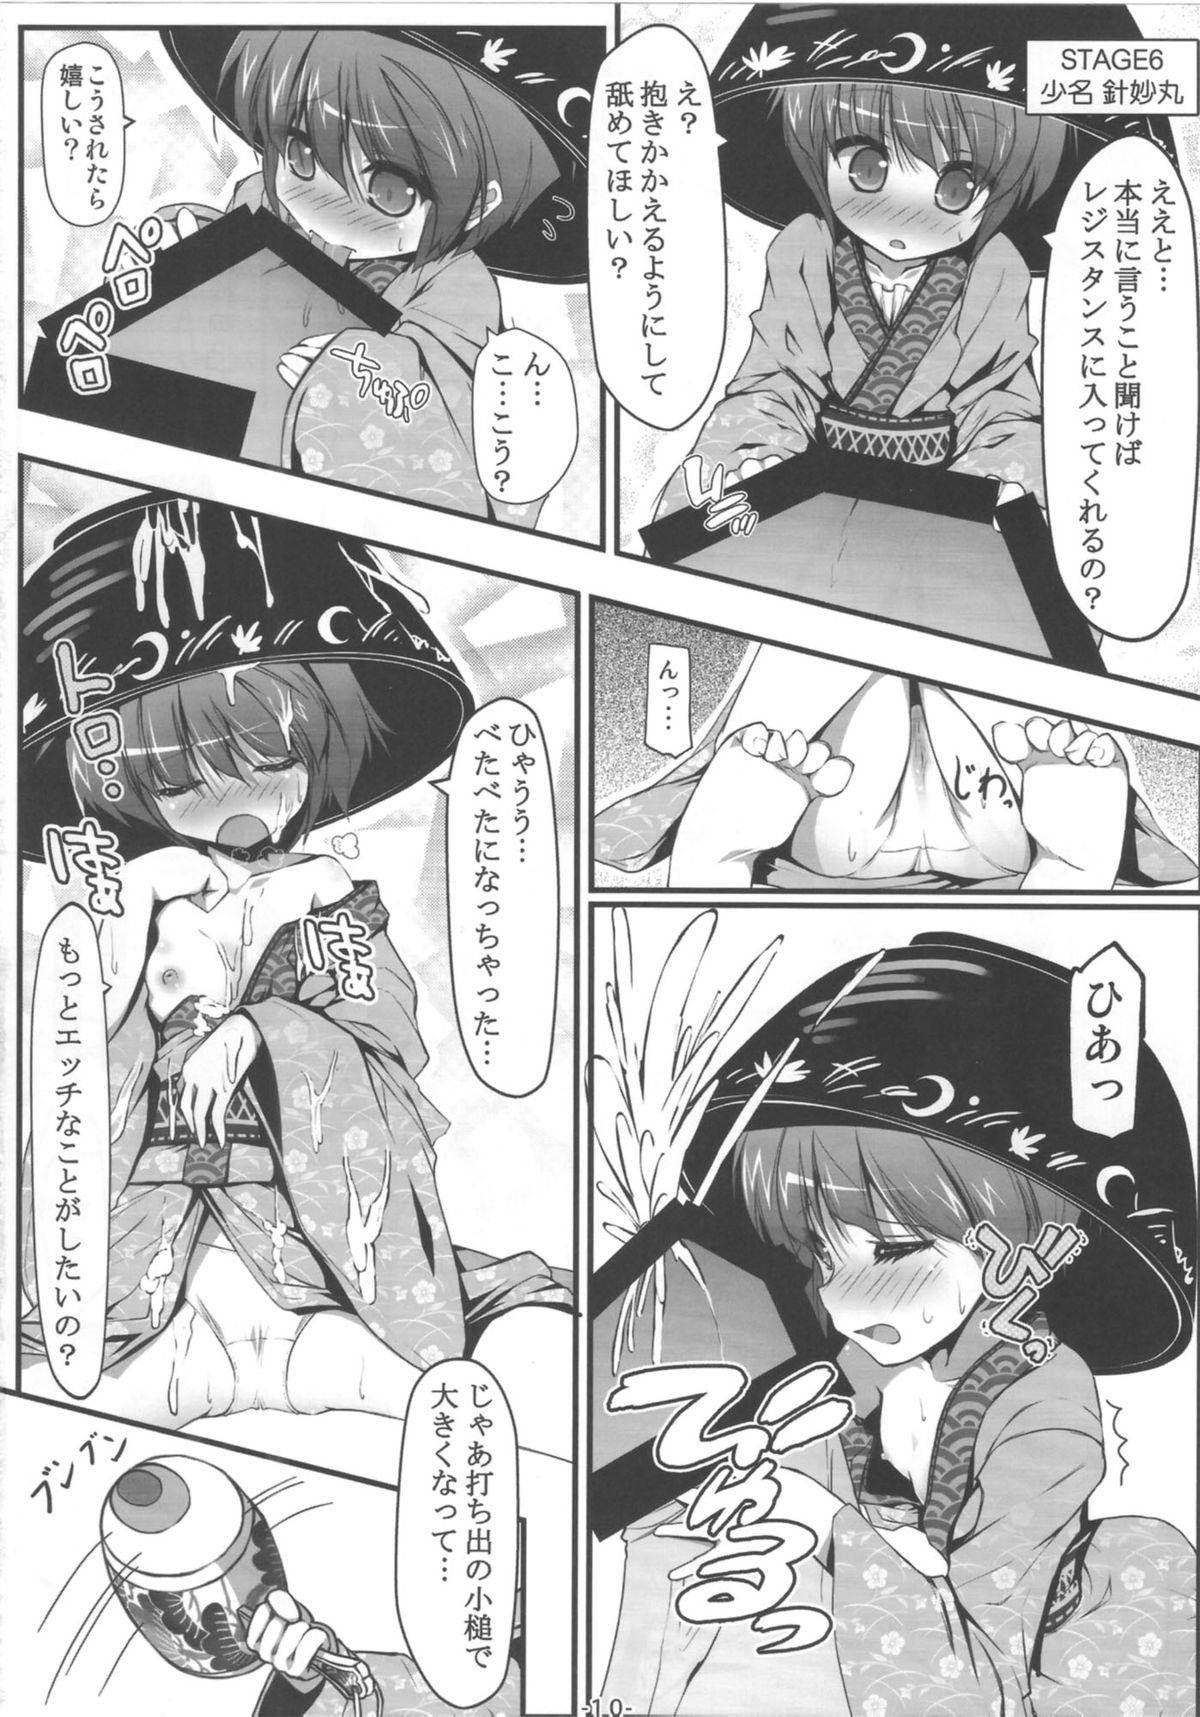 Tongue Ookikuna ~ Re!? - Touhou project Salope - Page 11